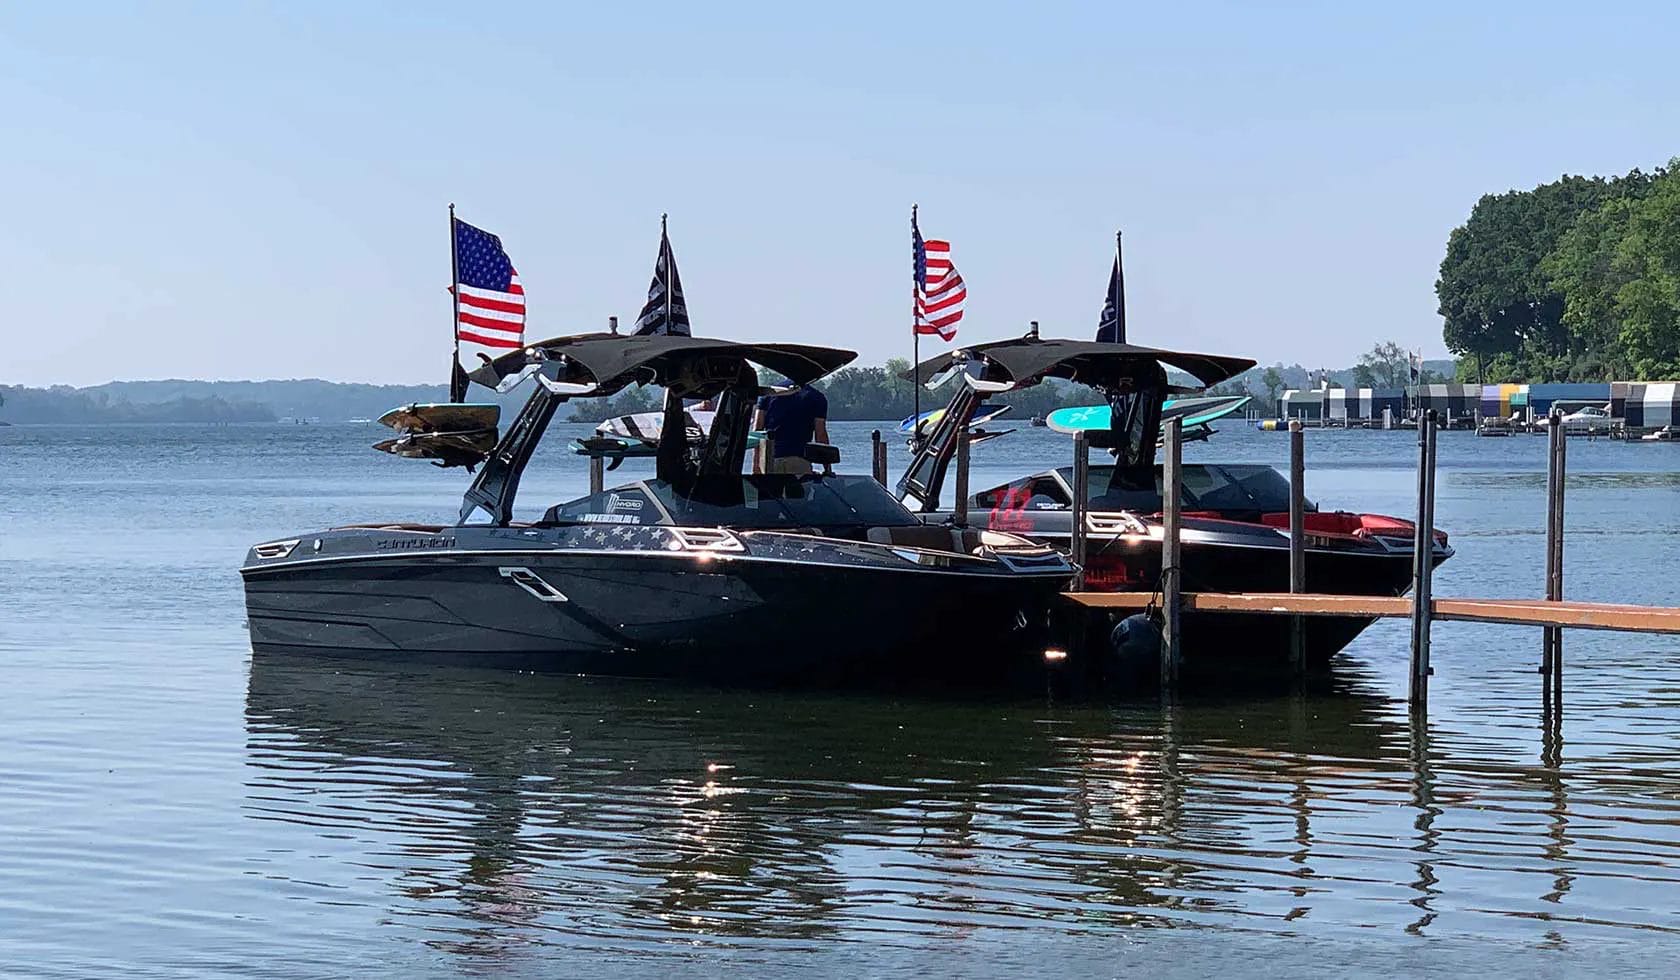 Two wakesurf boats docked at a dock with American flags.